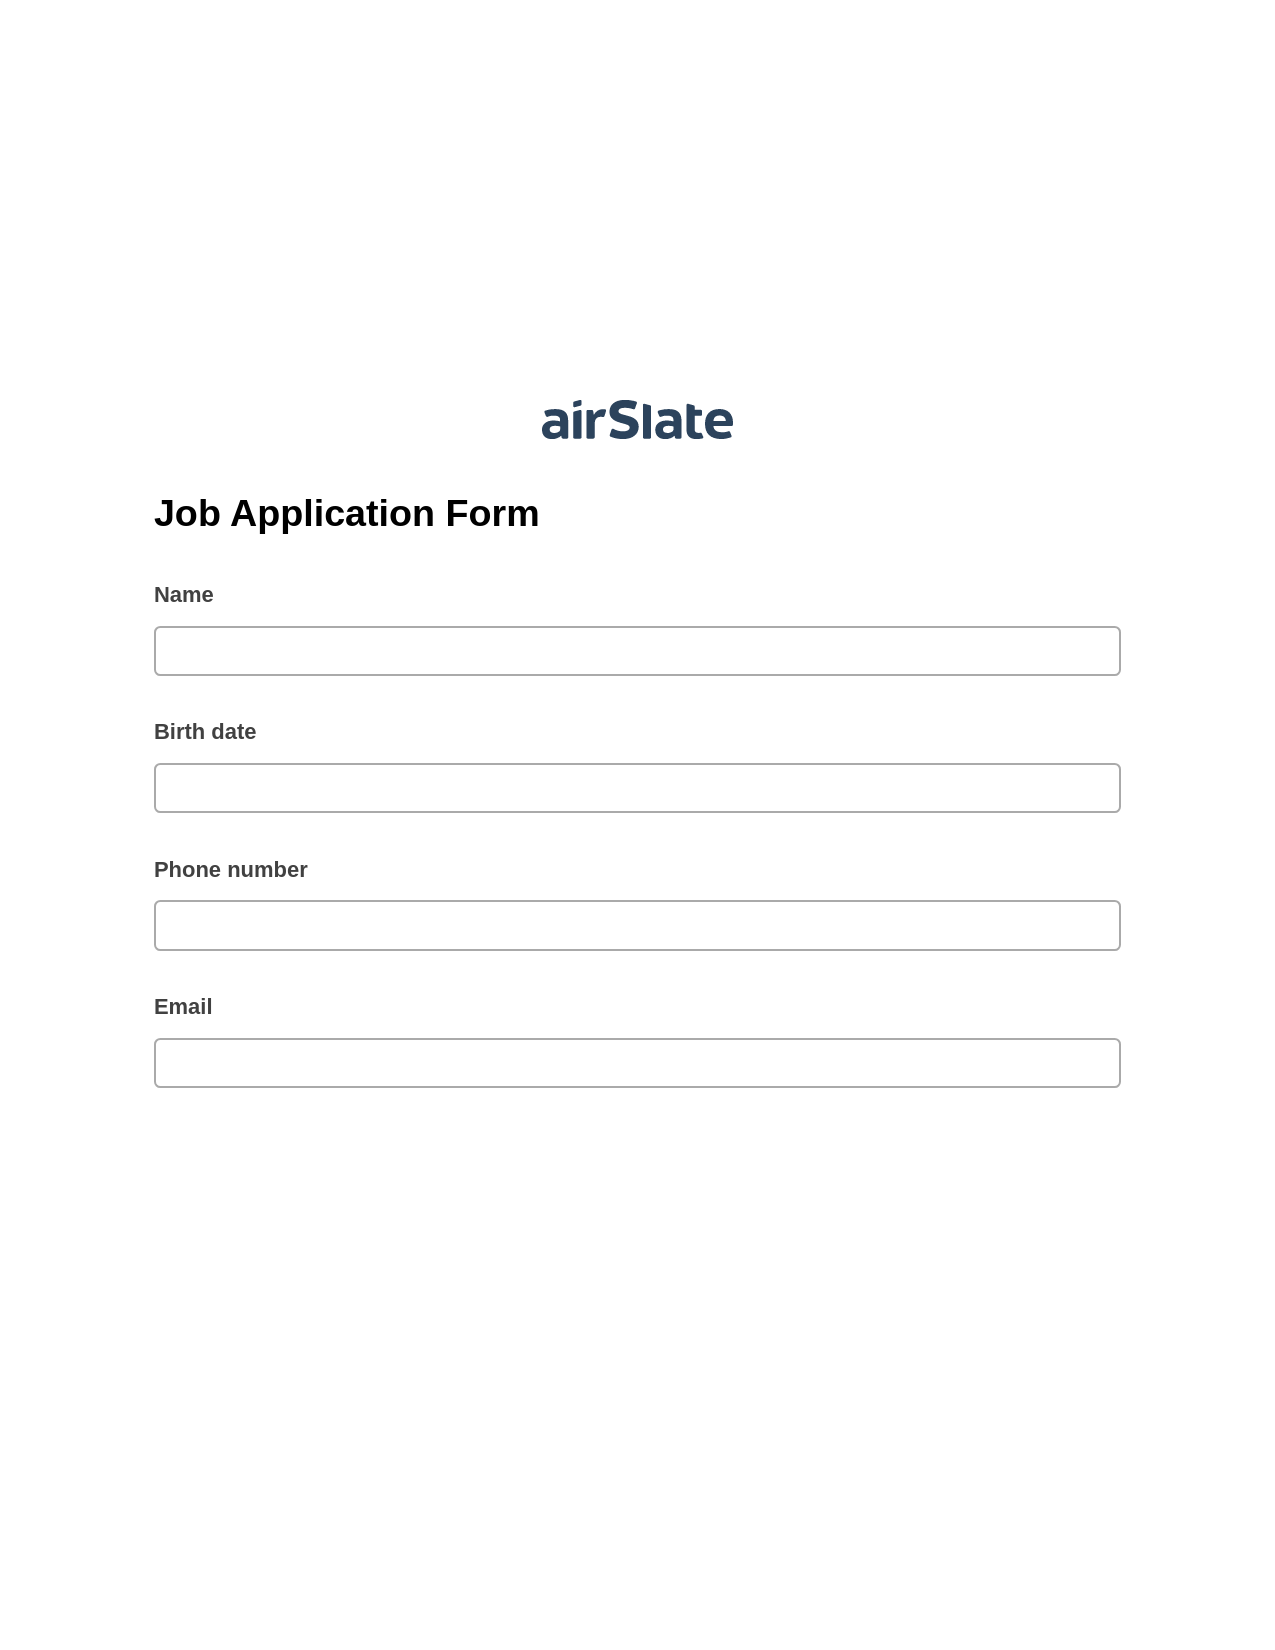 Multirole Job Application Form Pre-fill Document Bot, In-person Signing Bot, Archive to SharePoint Folder Bot